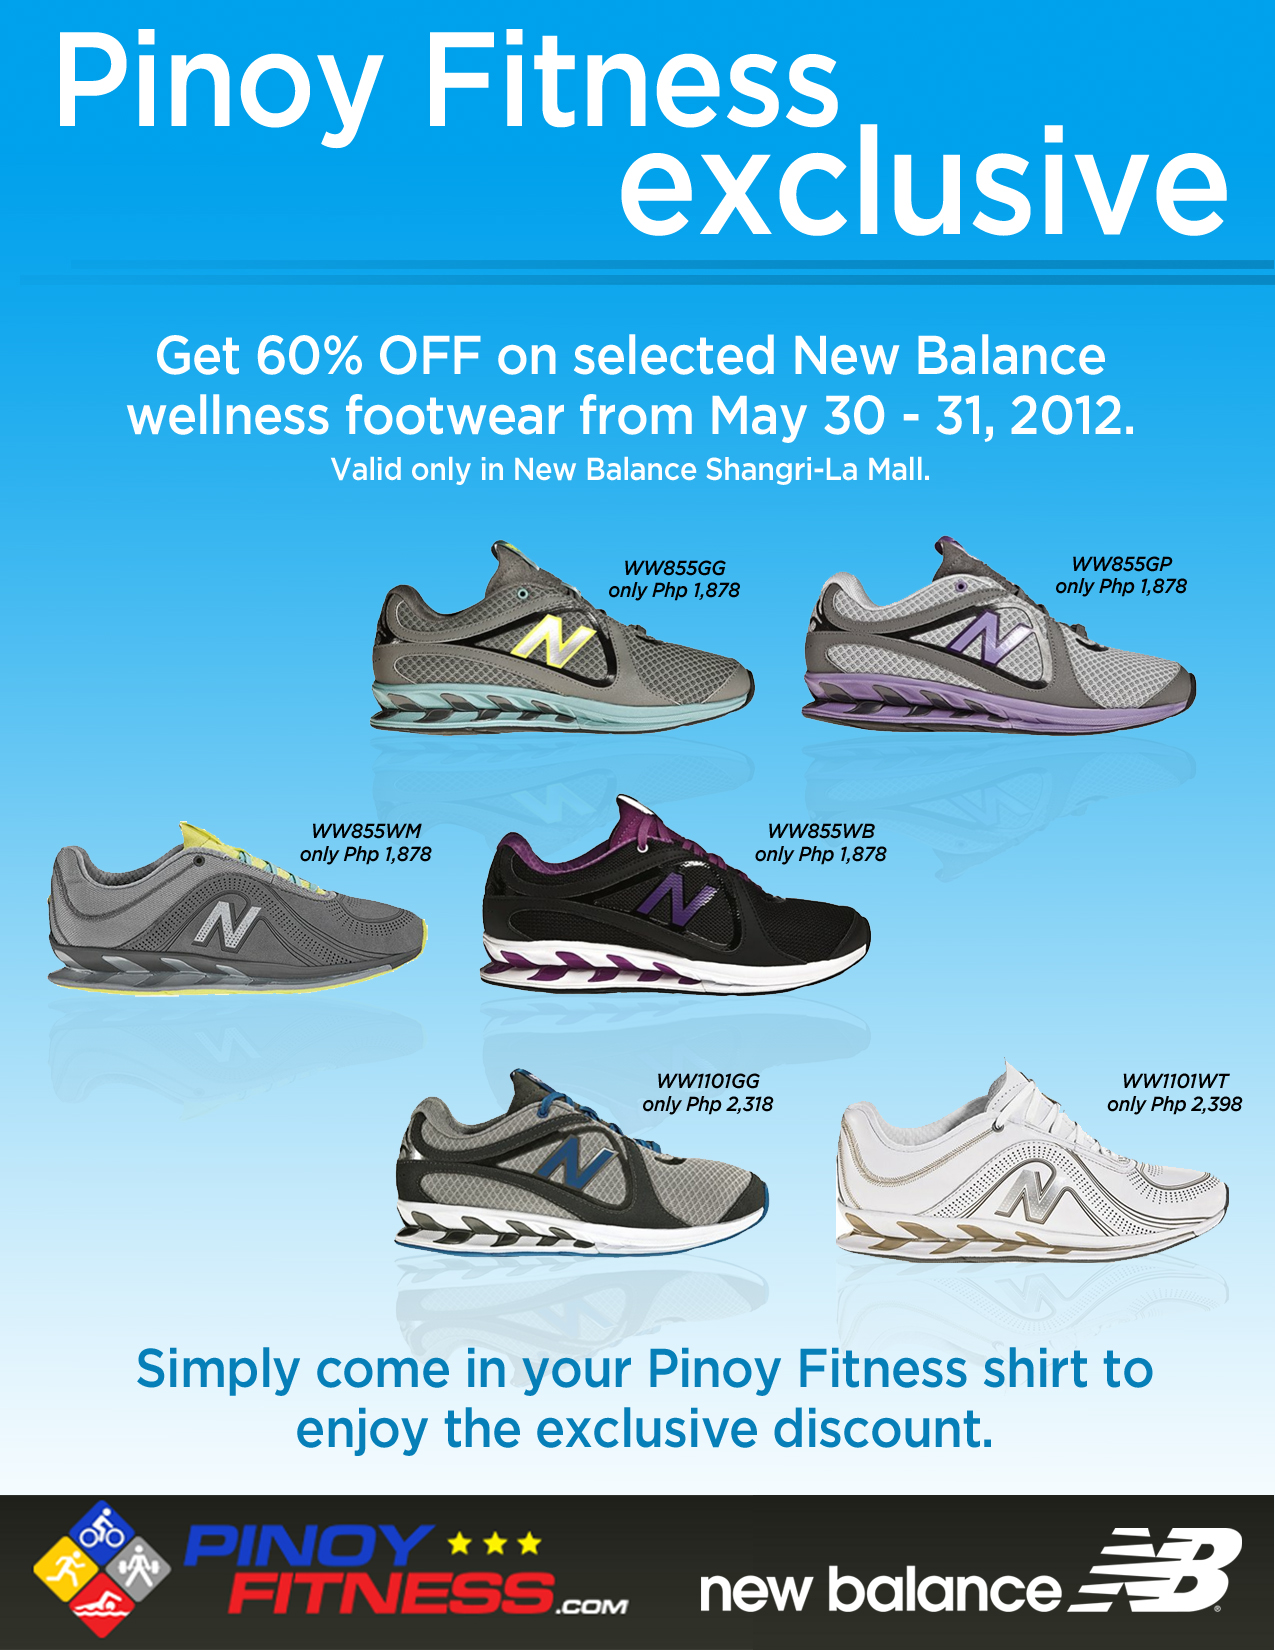 Get 60% OFF New Balance Women's Wellness Line exclusive to Pinoy